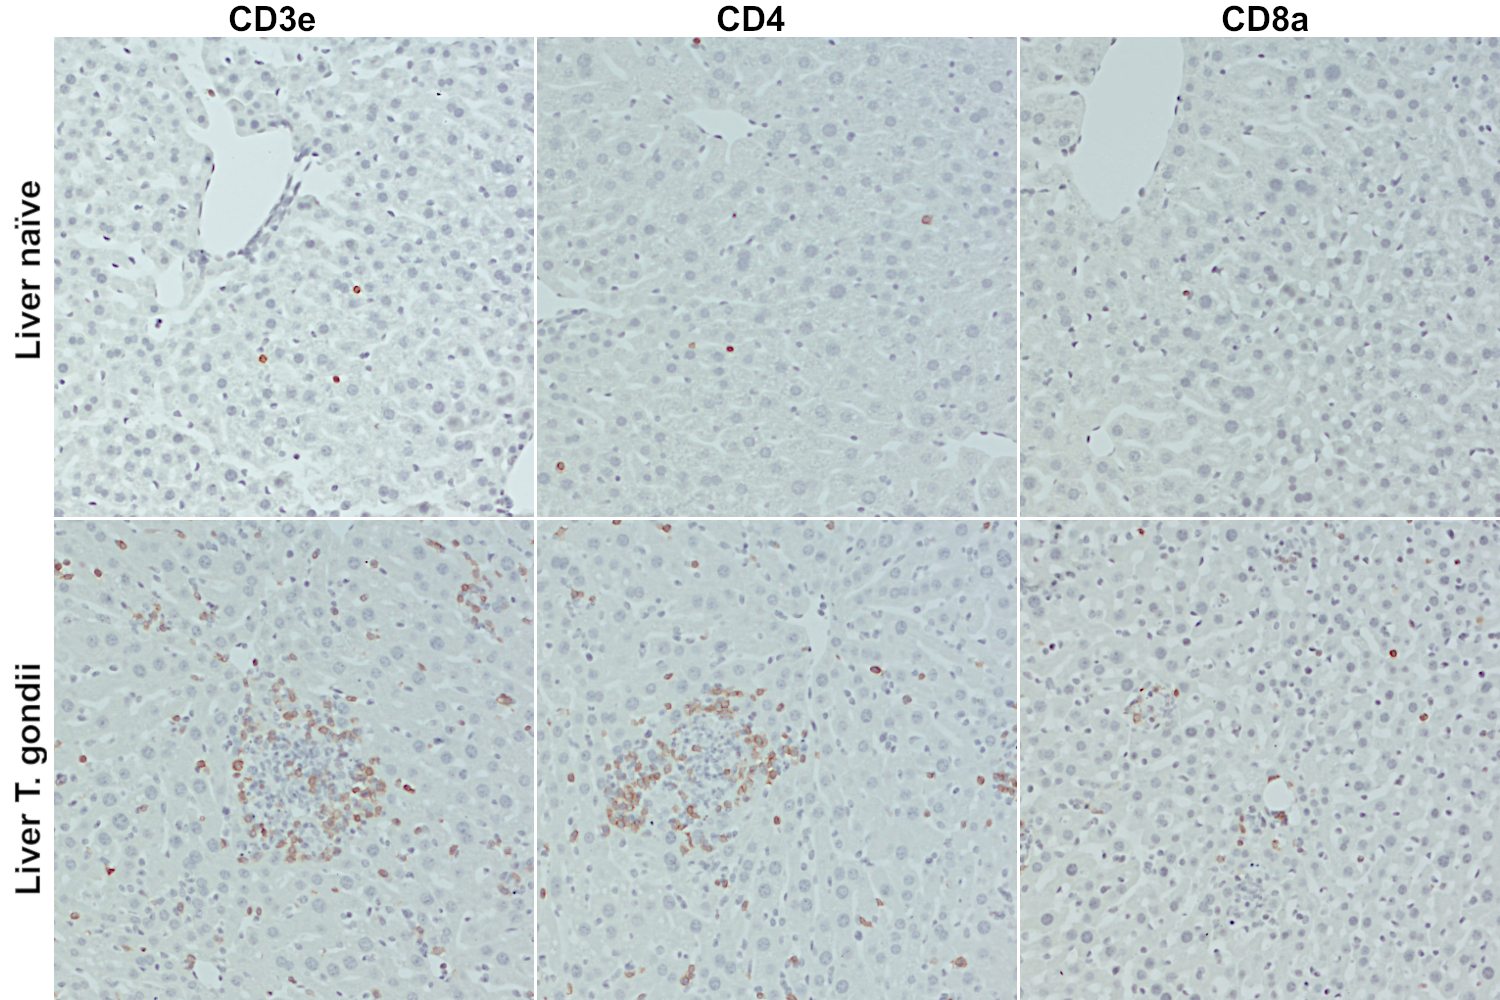 Immunohistochemical detection of T cell markers CD3e